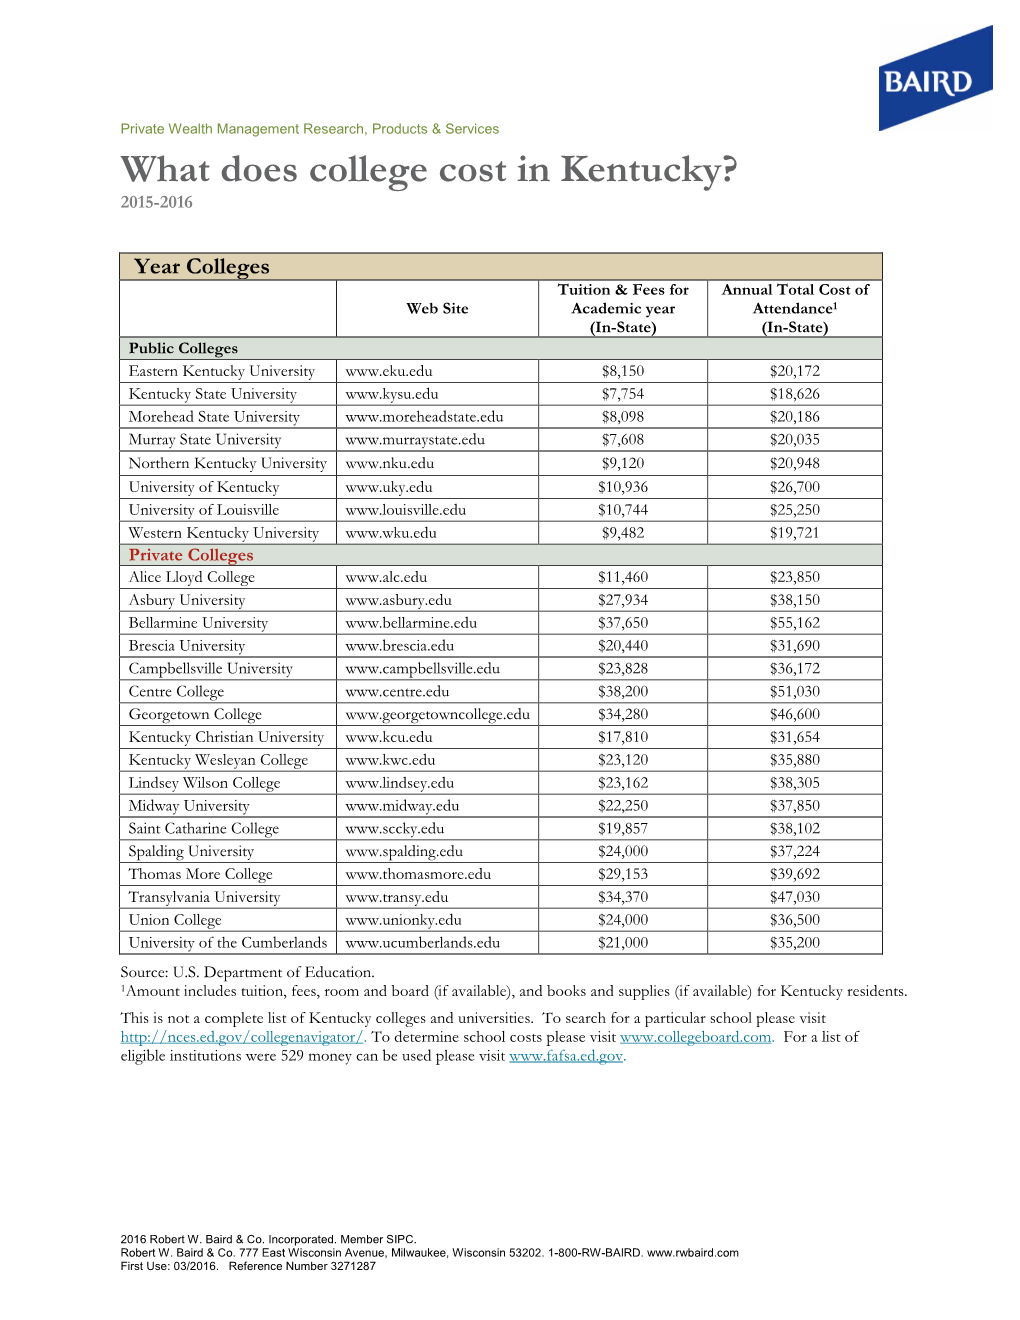 What Does College Cost in Kentucky? 2015-2016